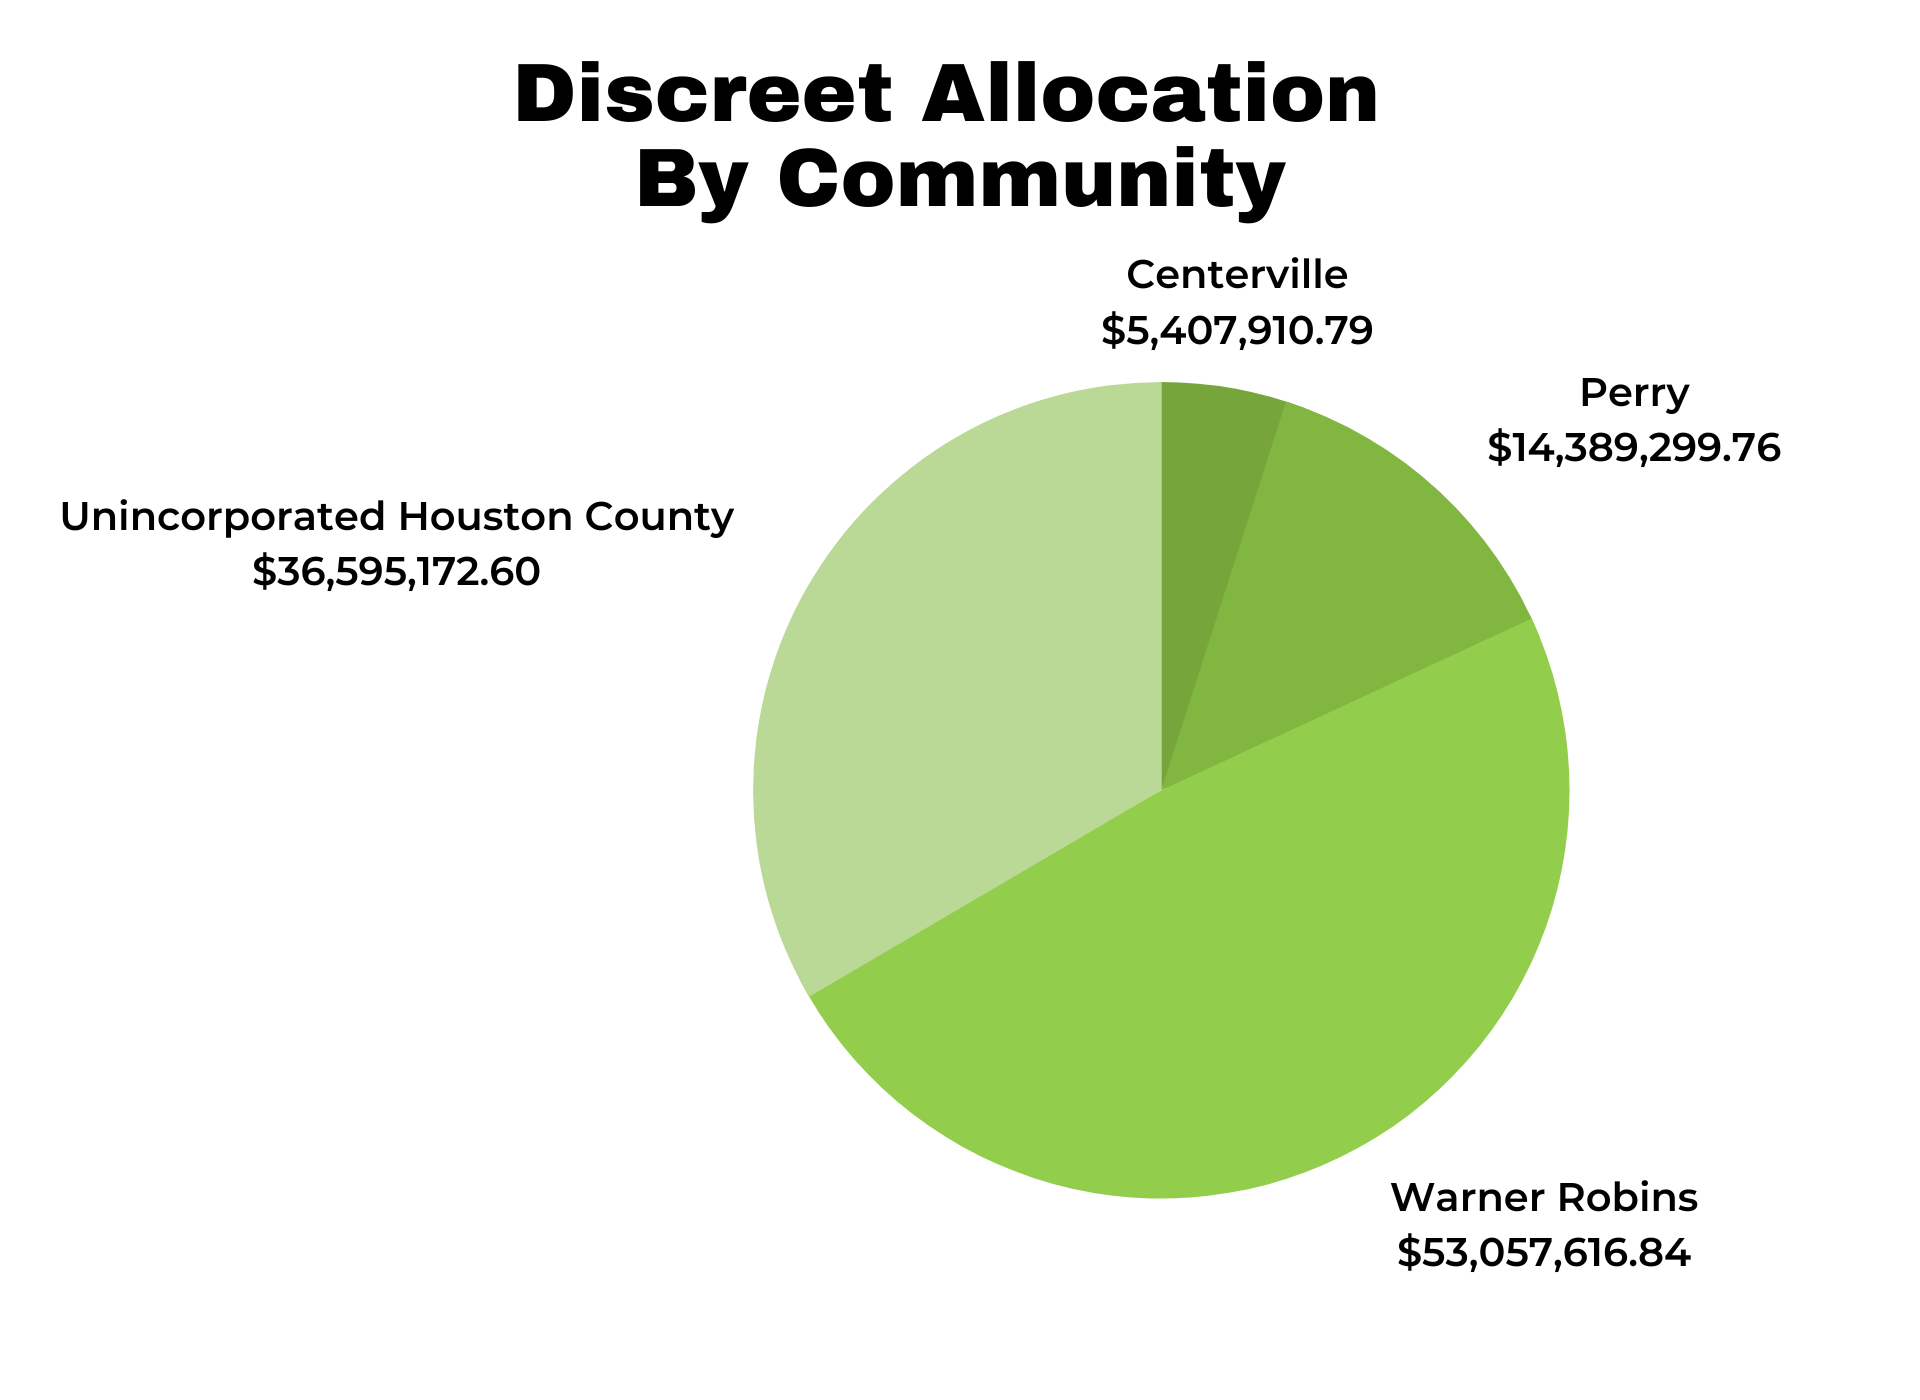 Discreet Allocation by Community